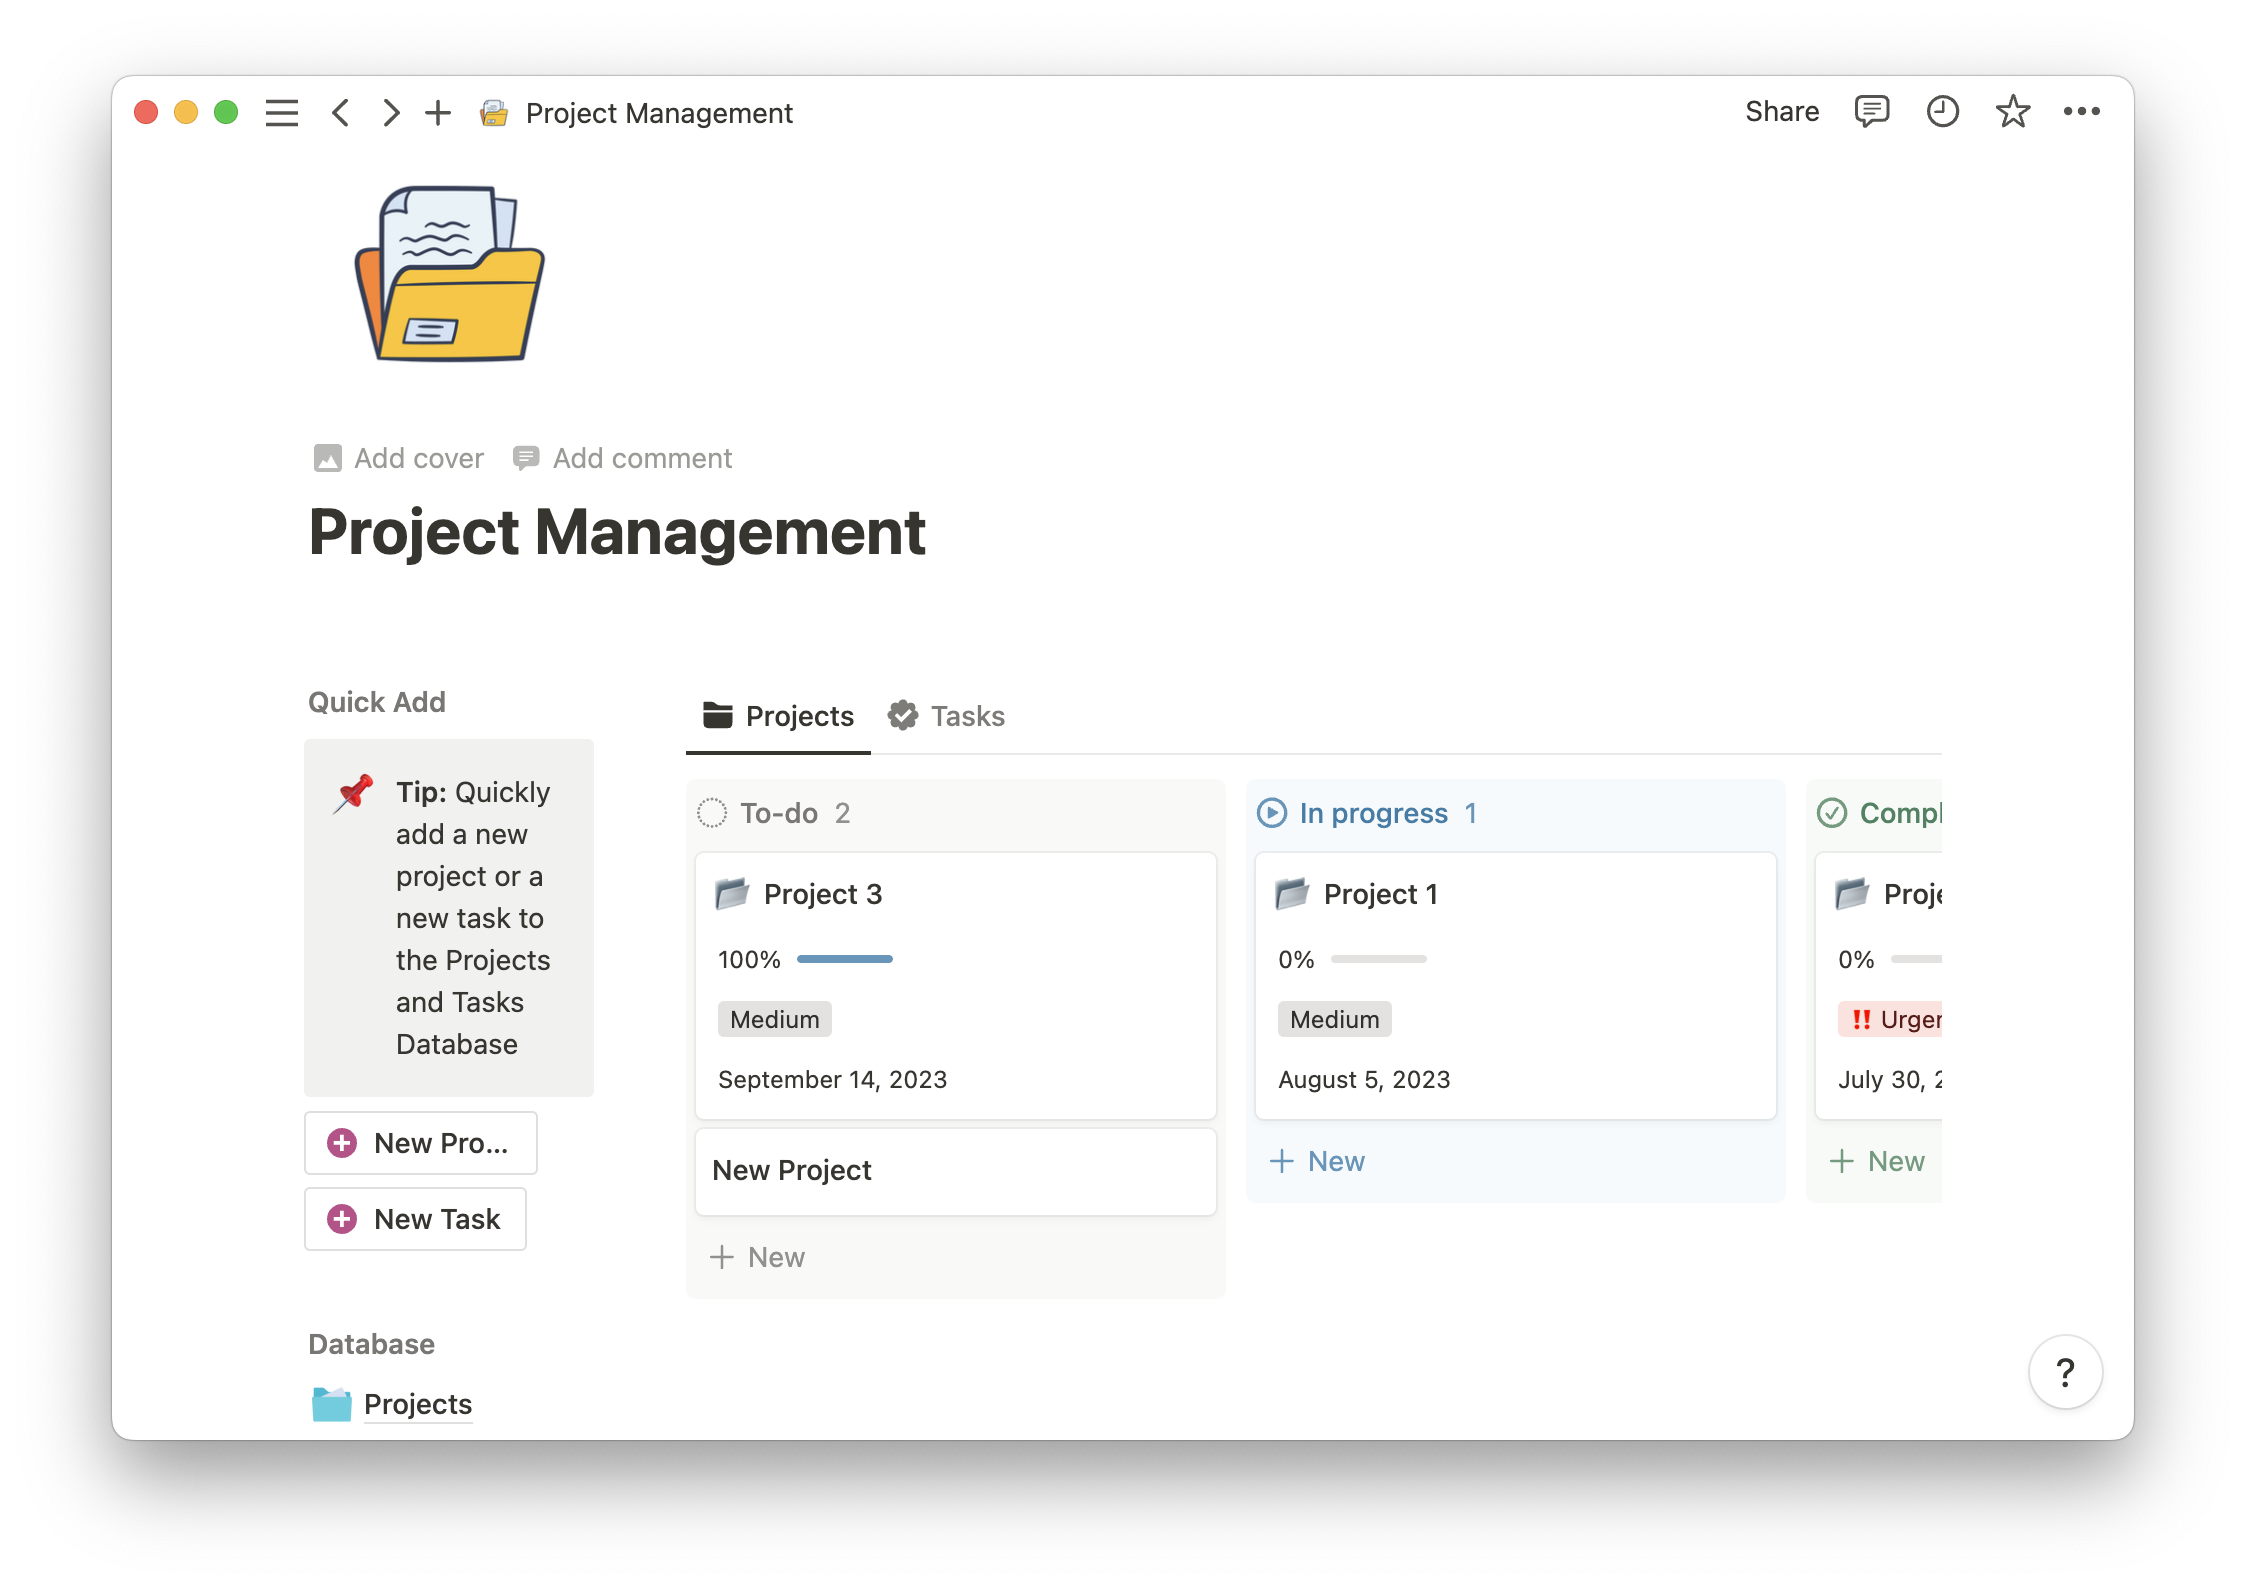 notions-project-management-template